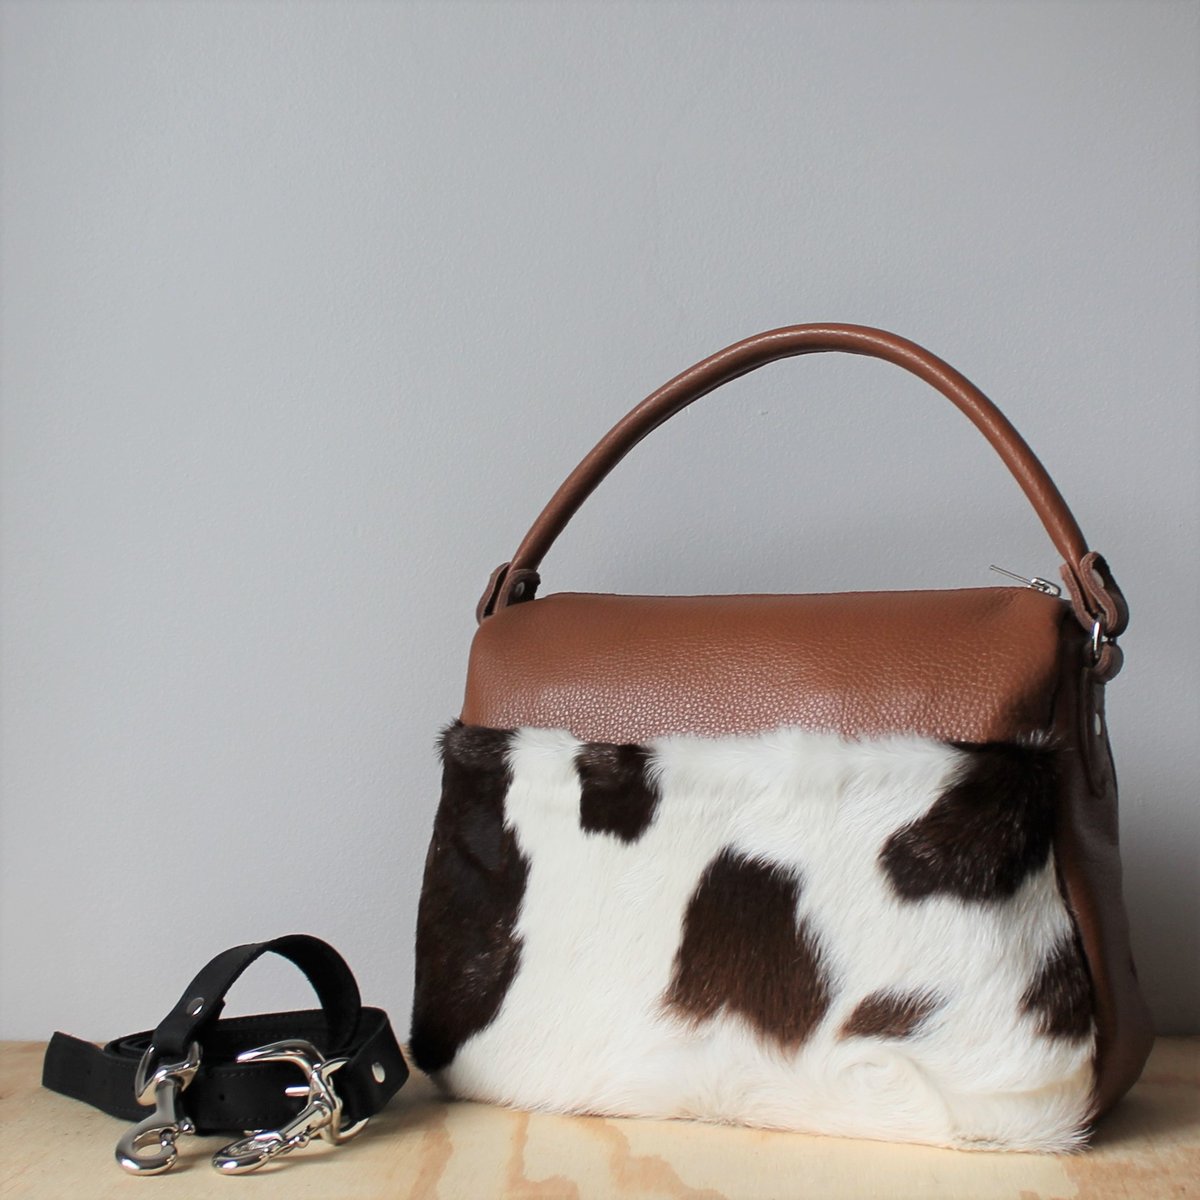 Runabout in Caramel Cow Hide